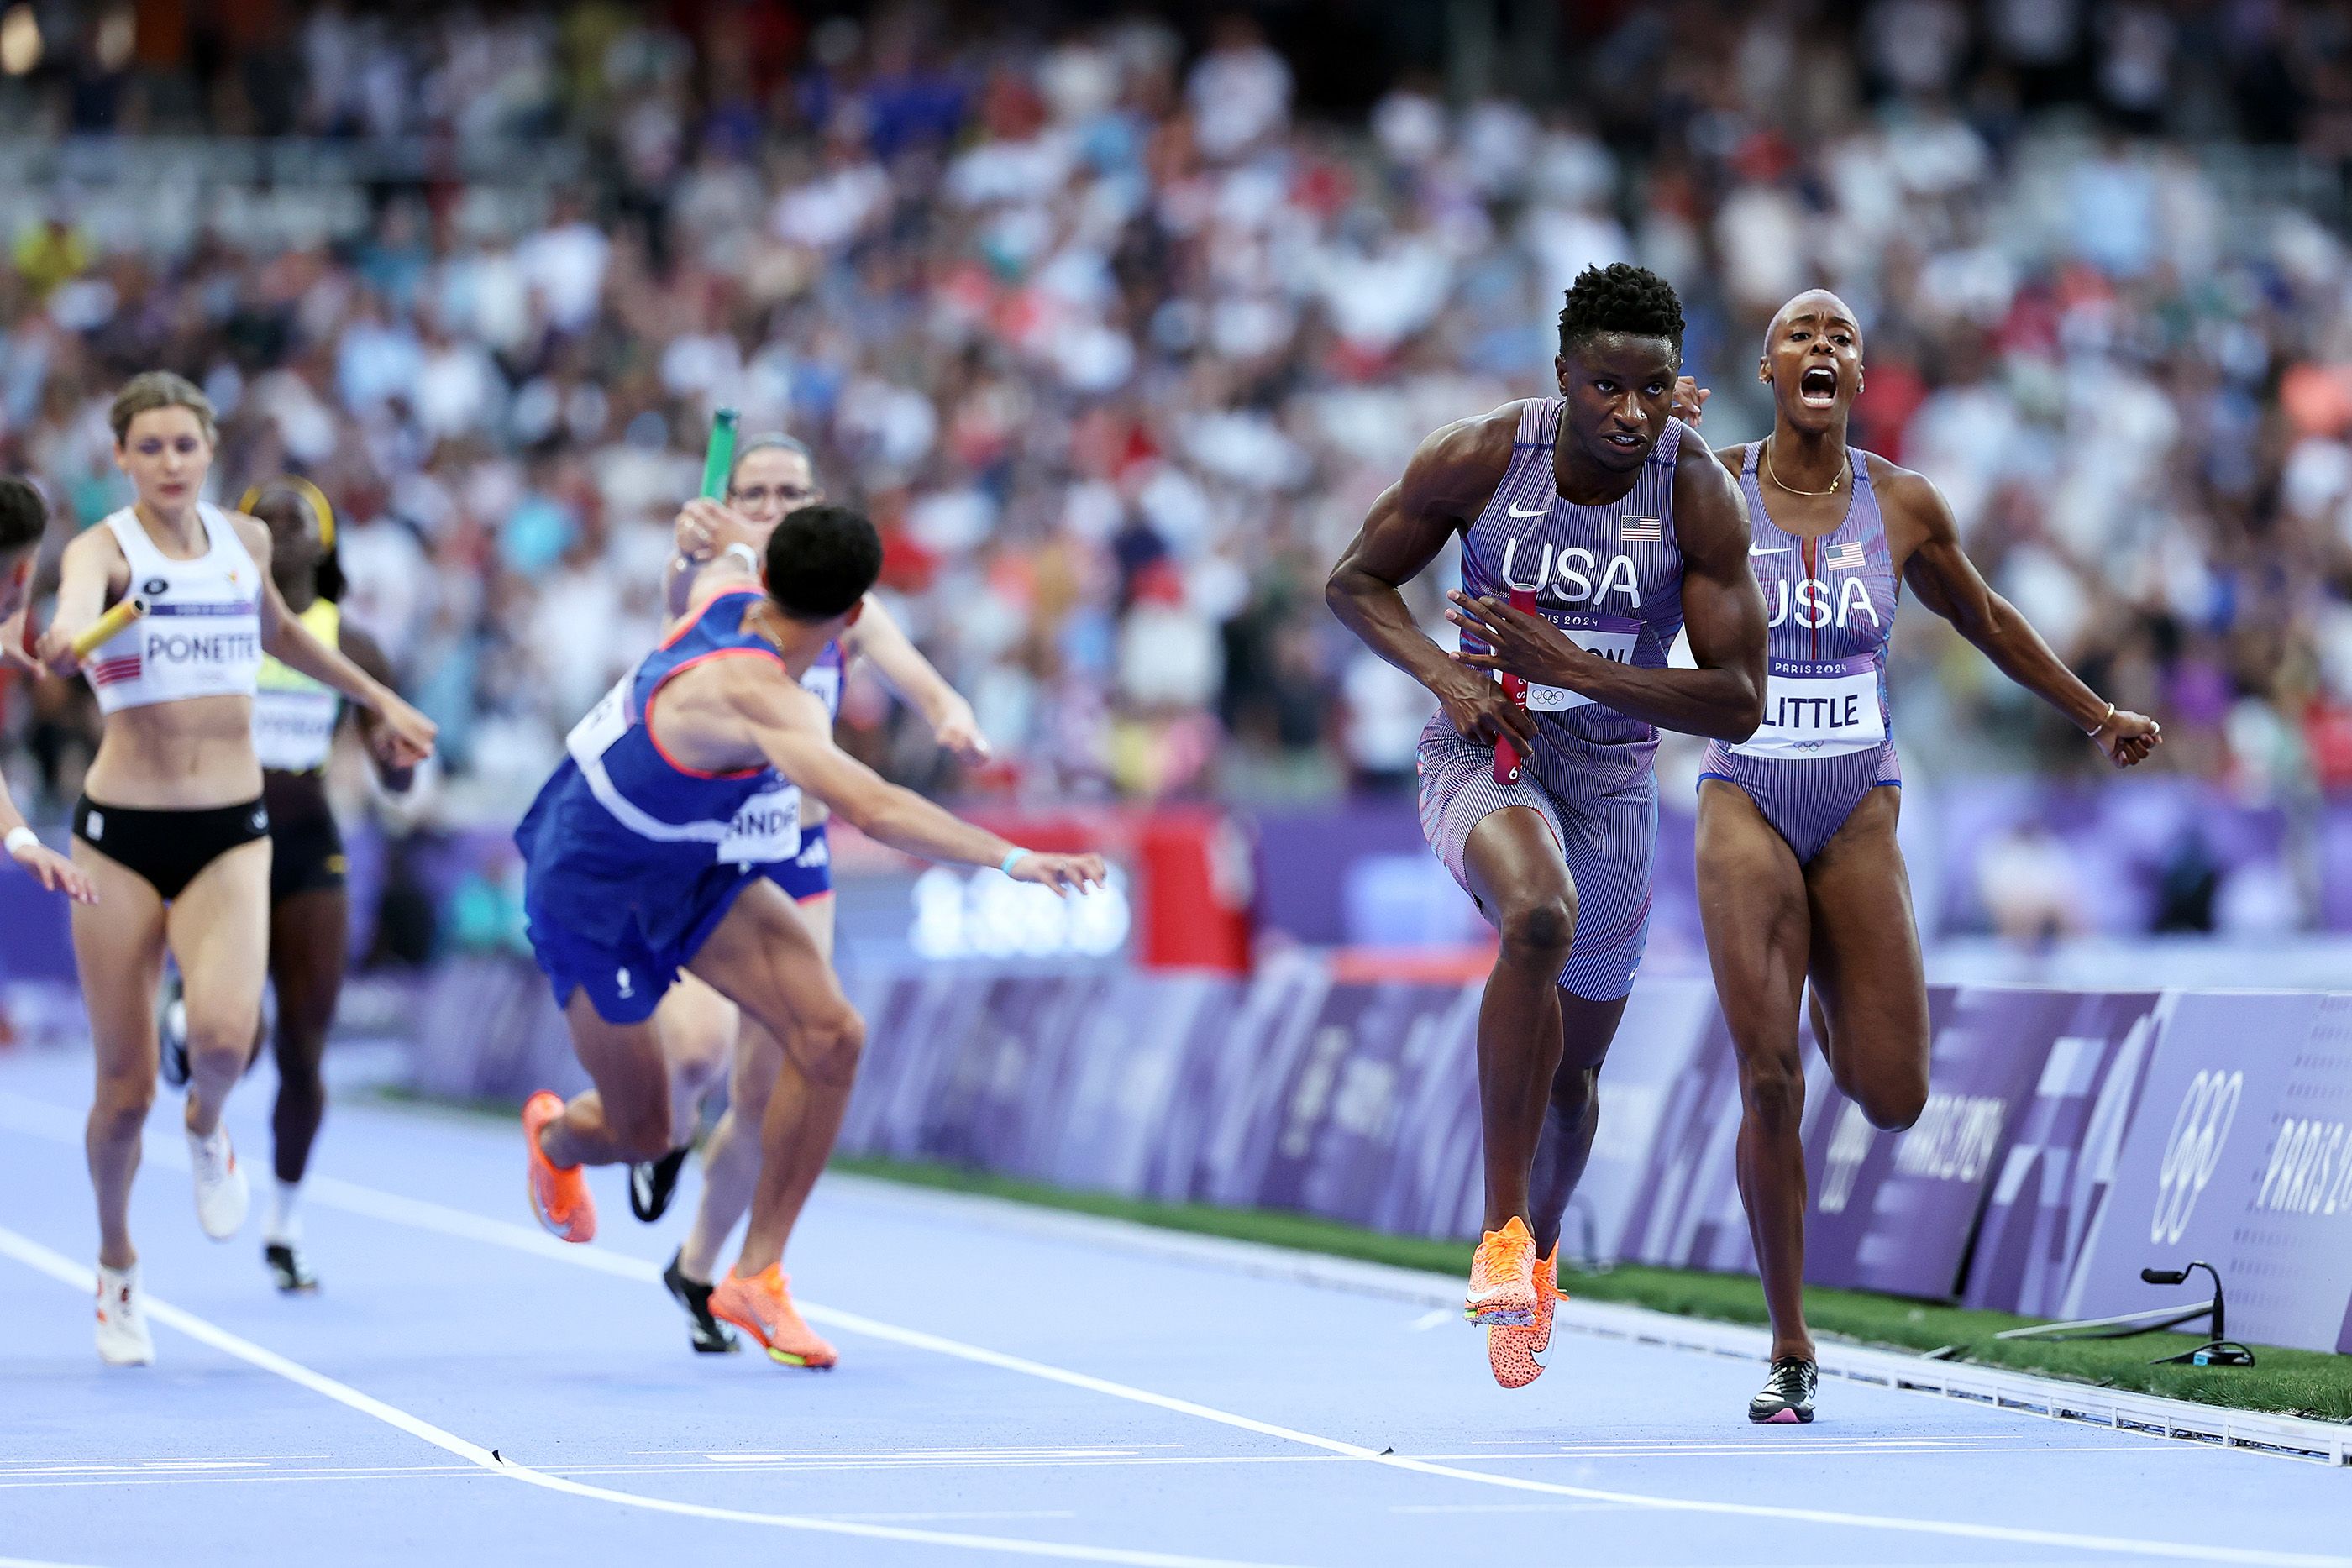 The US team on the way to a mixed 4x400m world record at the Paris 2024 Olympic Games